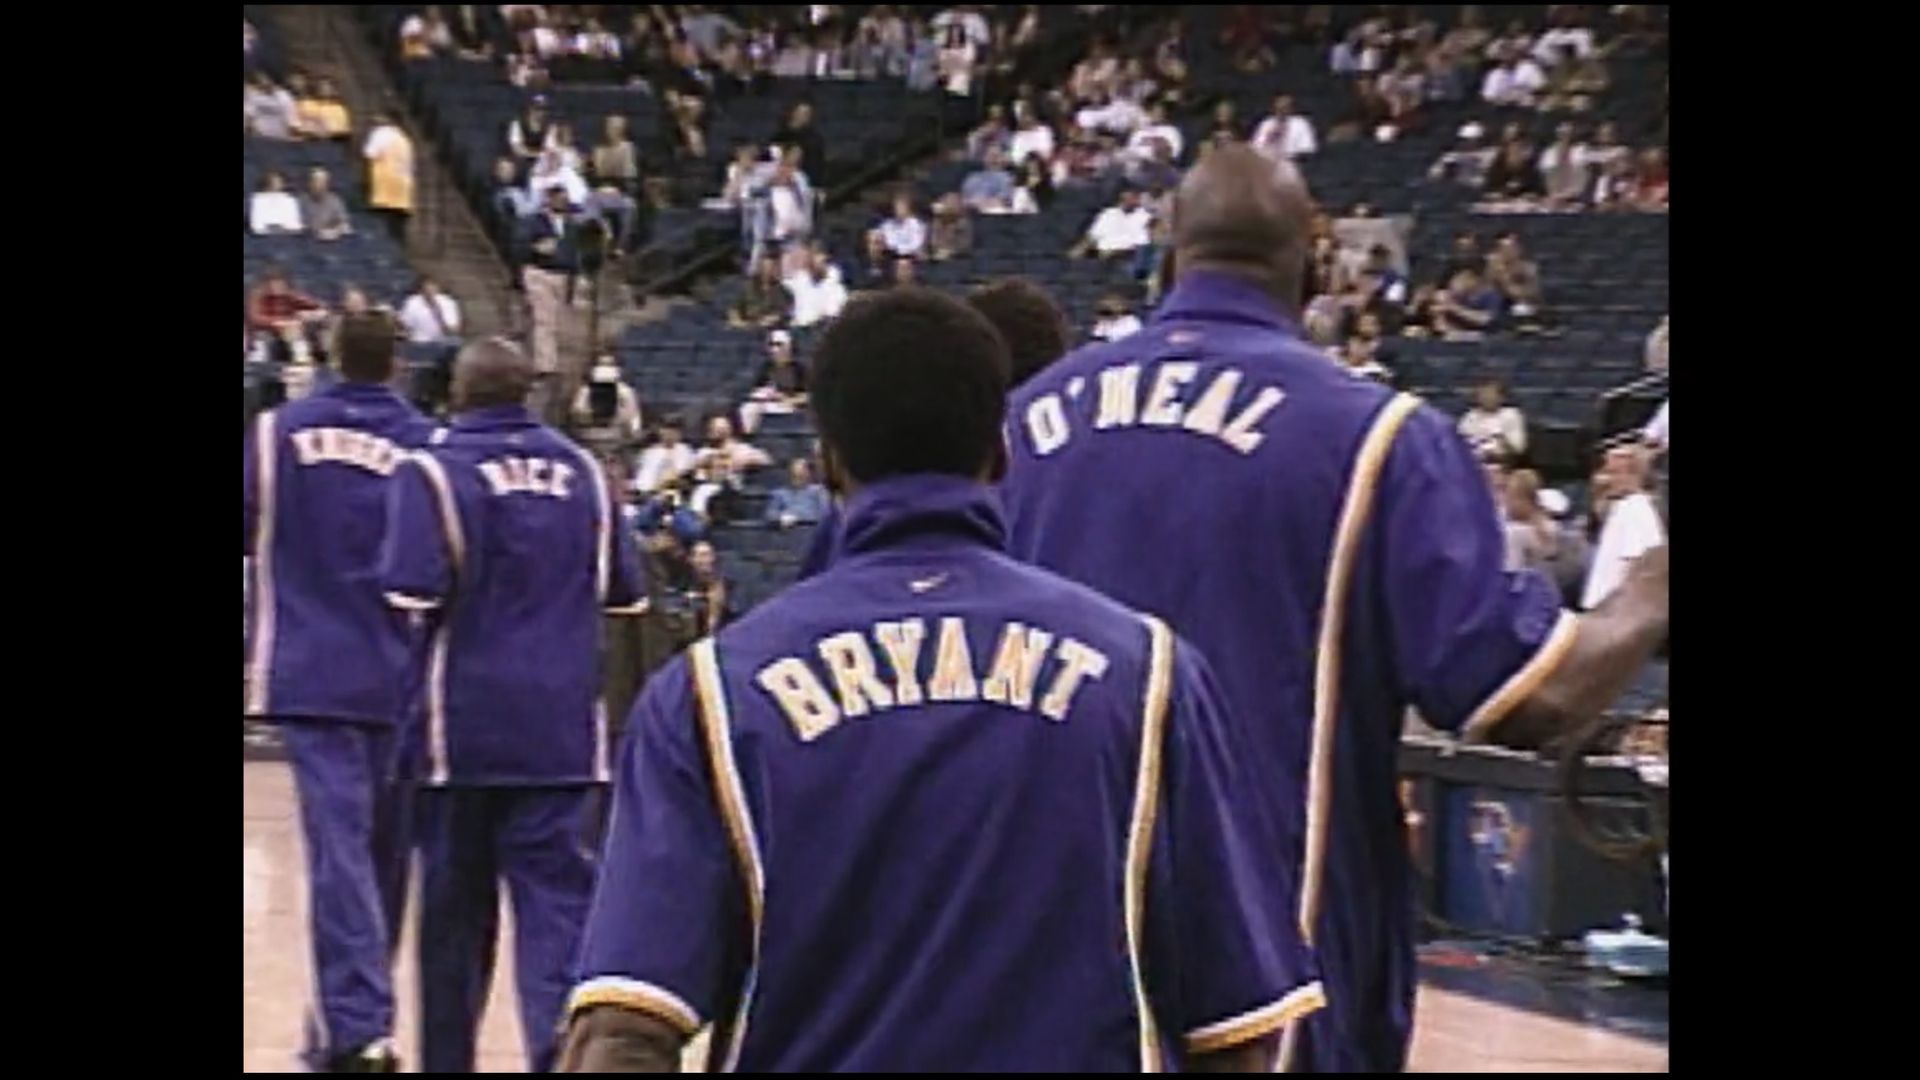 Legacy: The True Story of the LA Lakers background